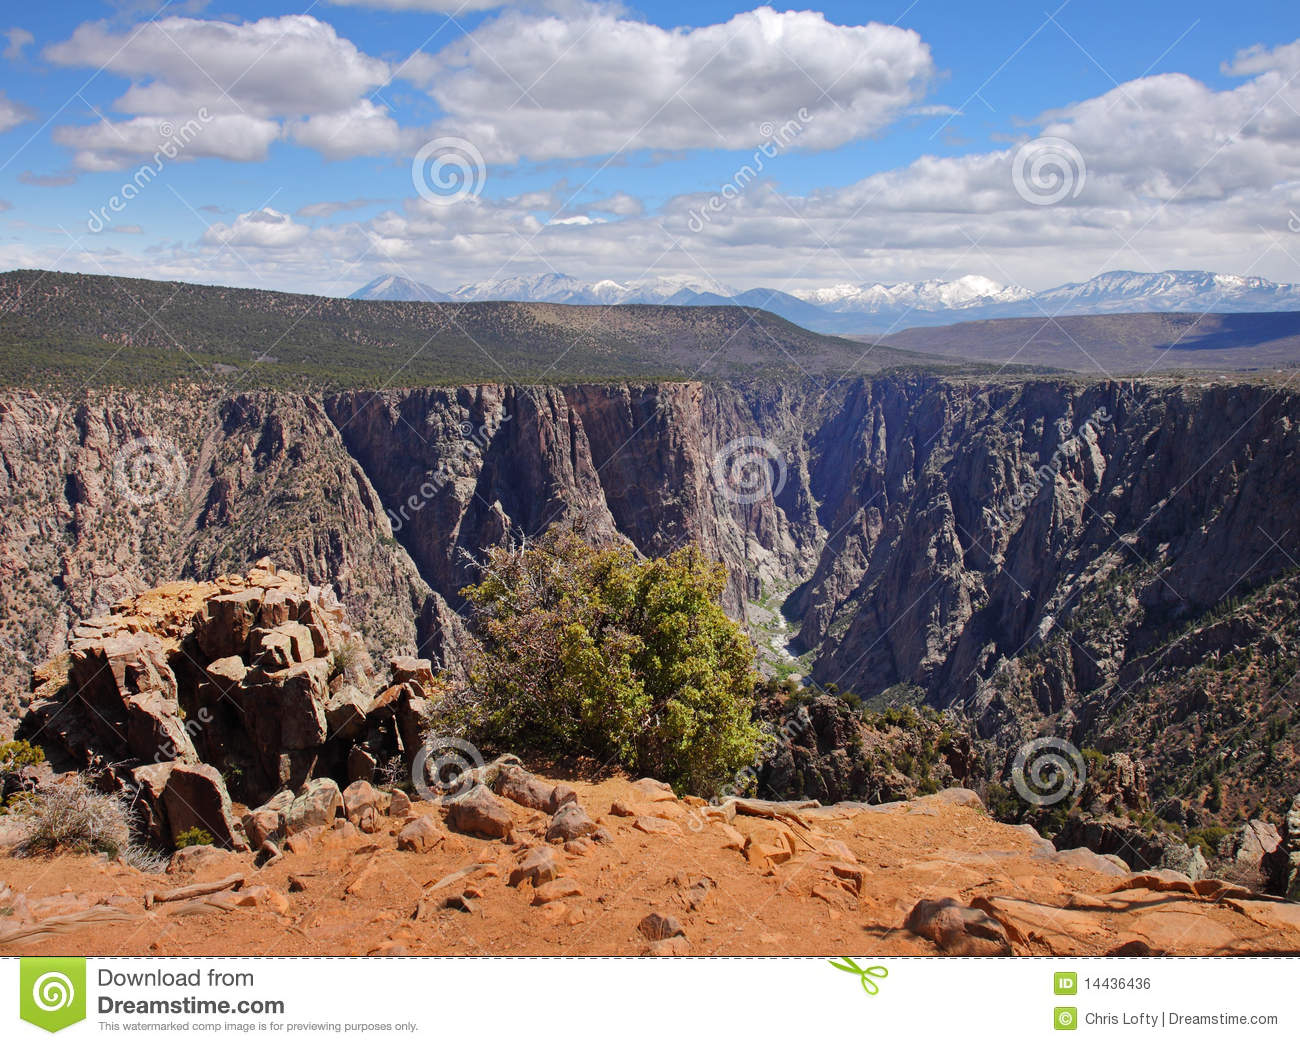 Canyon Landscape In The Usa Royalty Free Stock Image   Image  14436436